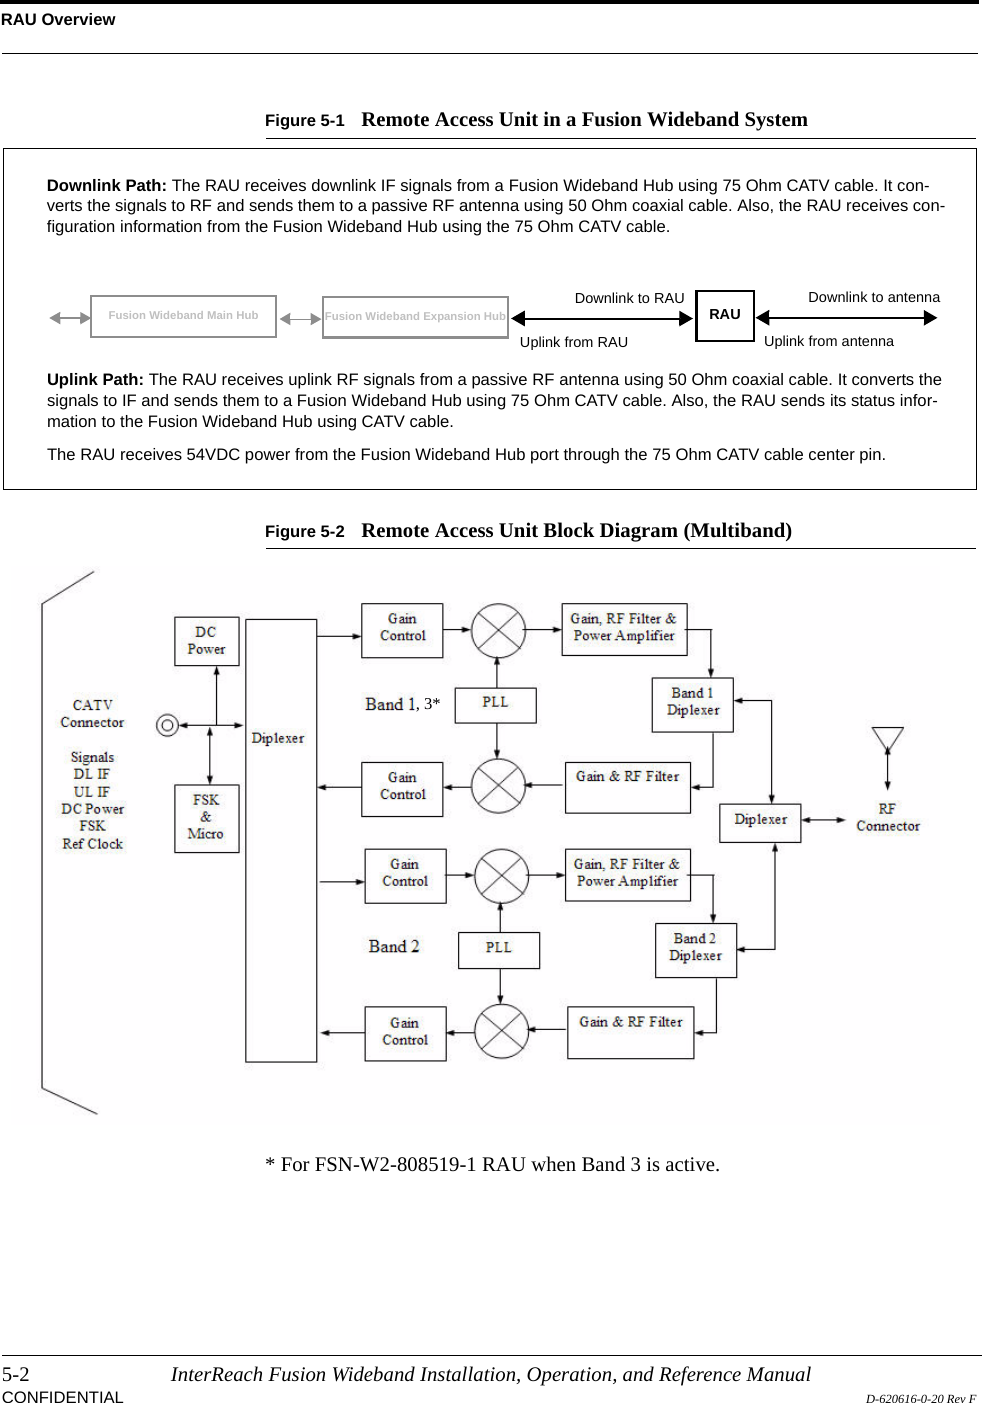 RAU Overview5-2 InterReach Fusion Wideband Installation, Operation, and Reference ManualCONFIDENTIAL D-620616-0-20 Rev FFigure 5-1 Remote Access Unit in a Fusion Wideband SystemFigure 5-2 Remote Access Unit Block Diagram (Multiband)* For FSN-W2-808519-1 RAU when Band 3 is active.Fusion Wideband Expansion Hub RAUDownlink Path: The RAU receives downlink IF signals from a Fusion Wideband Hub using 75 Ohm CATV cable. It con-verts the signals to RF and sends them to a passive RF antenna using 50 Ohm coaxial cable. Also, the RAU receives con-figuration information from the Fusion Wideband Hub using the 75 Ohm CATV cable.Uplink Path: The RAU receives uplink RF signals from a passive RF antenna using 50 Ohm coaxial cable. It converts the signals to IF and sends them to a Fusion Wideband Hub using 75 Ohm CATV cable. Also, the RAU sends its status infor-mation to the Fusion Wideband Hub using CATV cable.The RAU receives 54VDC power from the Fusion Wideband Hub port through the 75 Ohm CATV cable center pin.Downlink to RAUUplink from RAUFusion Wideband Main HubDownlink to antennaUplink from antenna, 3*